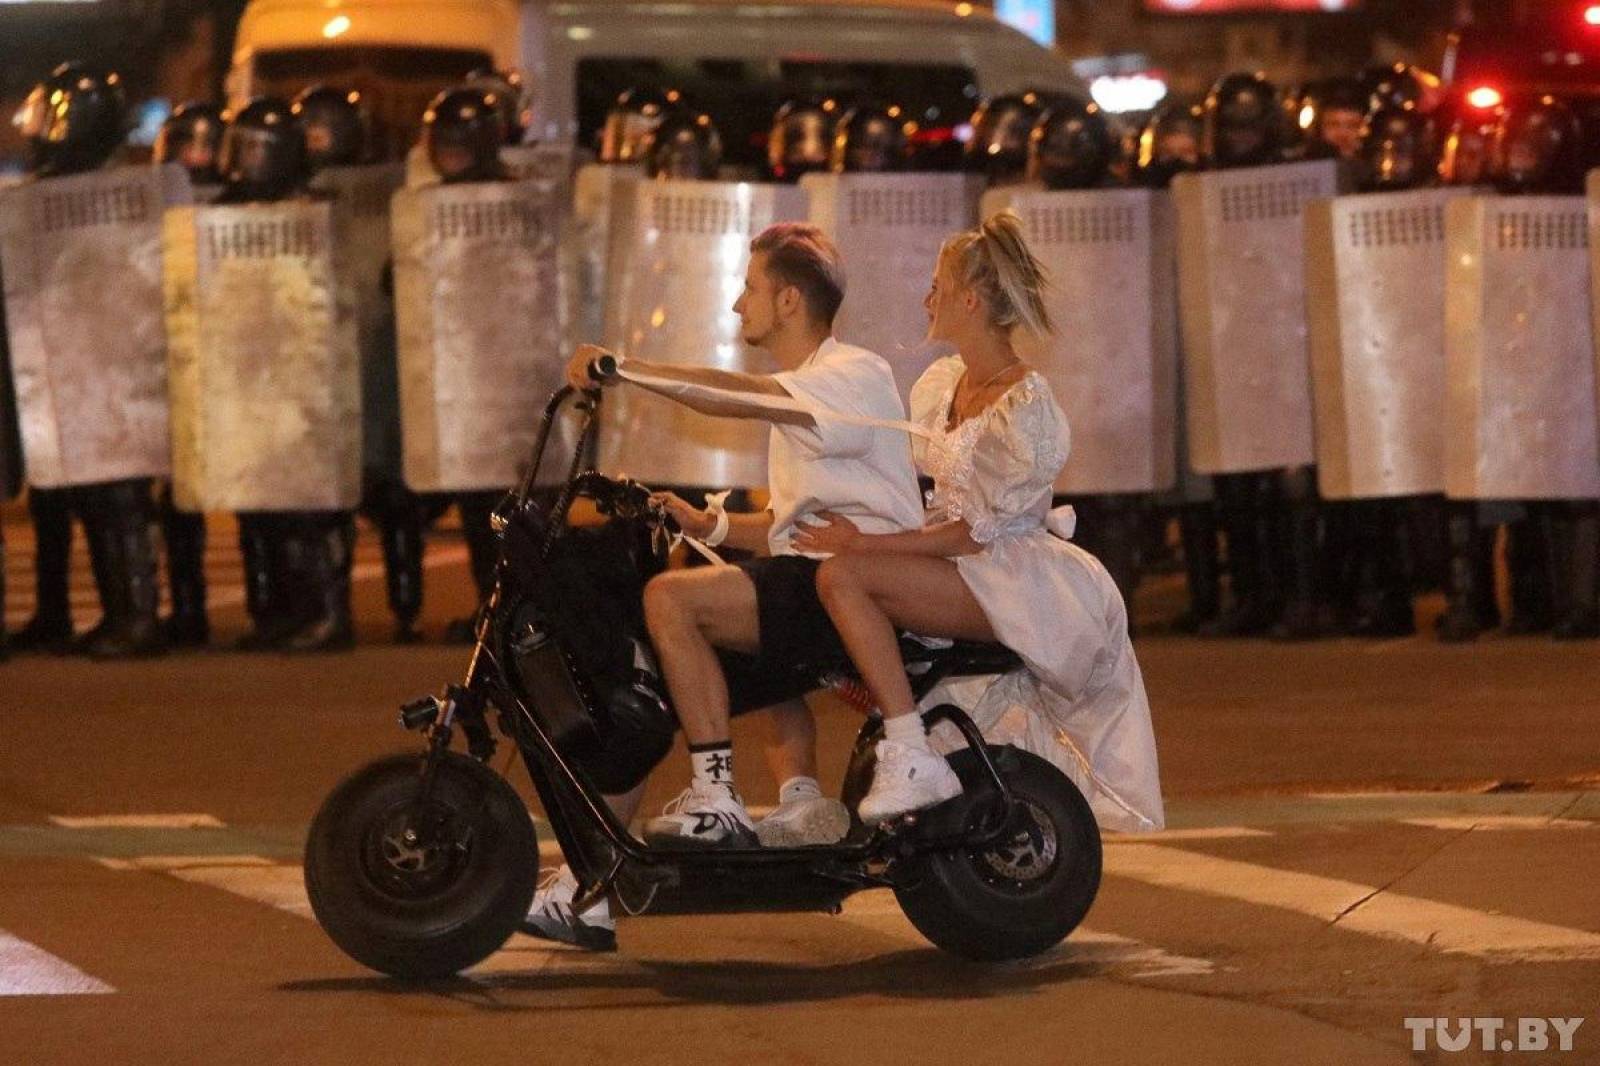 A couple rides on a scooter in front of law enforcement officers blocking a street after poll closed at presidential election in Minsk